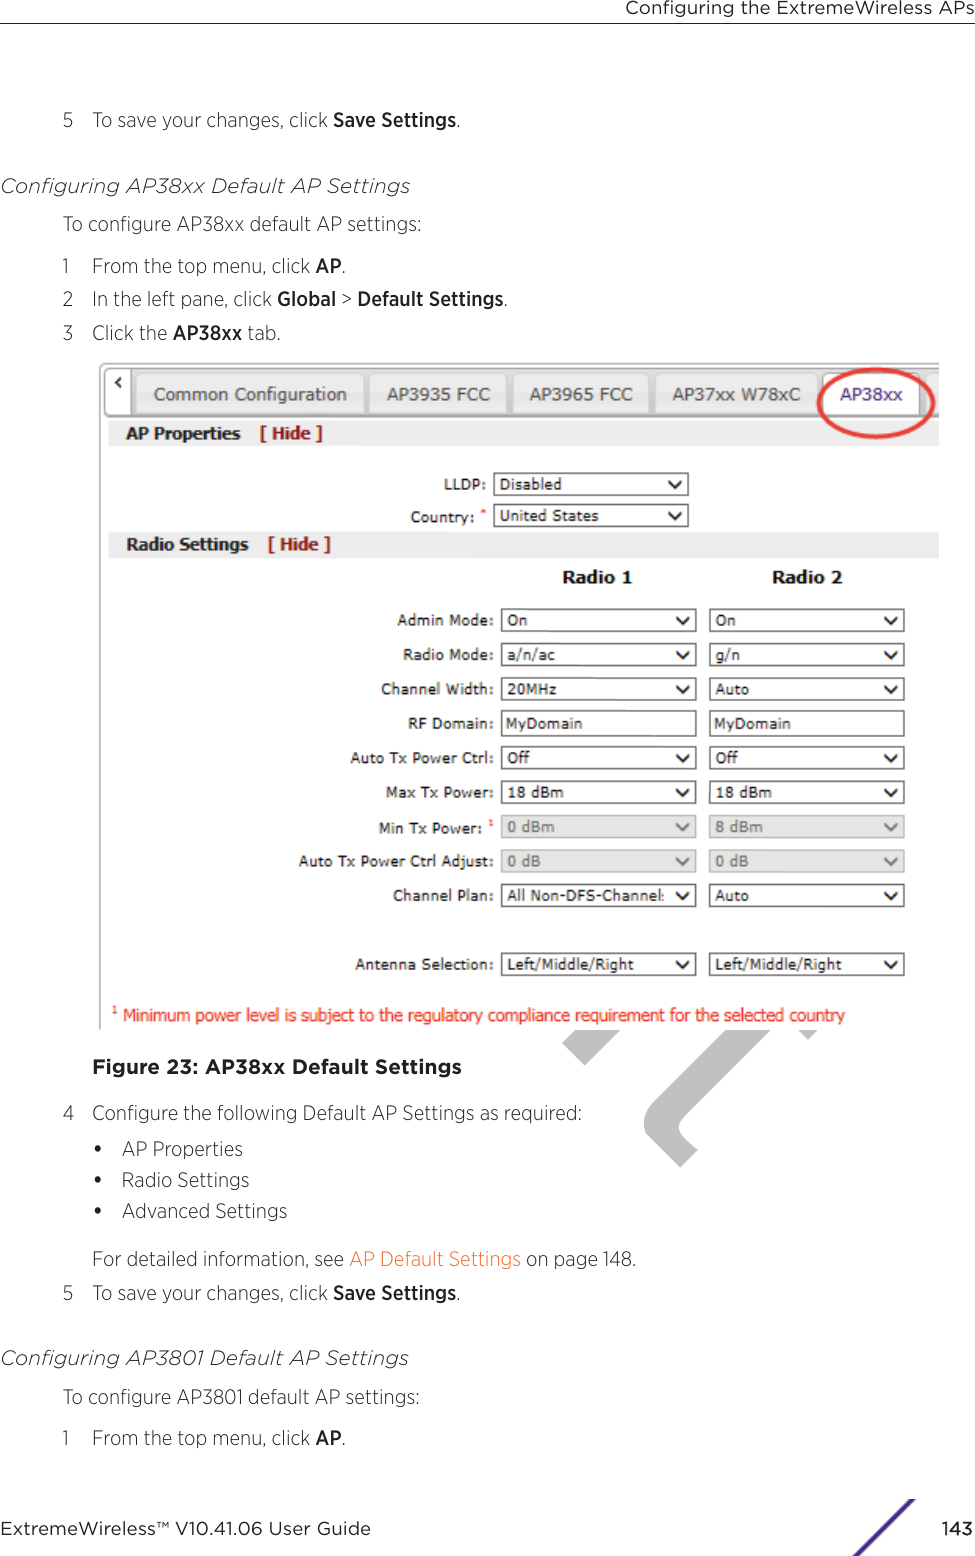 ft5 To save your changes, click Save Settings.Conﬁguring AP38xx Default AP SettingsTo conﬁgure AP38xx default AP settings:1 From the top menu, click AP.2 In the left pane, click Global &gt; Default Settings.3 Click the AP38xx tab.Figure 23: AP38xx Default Settings4 Conﬁgure the following Default AP Settings as required:•AP Properties•Radio Settings•Advanced SettingsFor detailed information, see AP Default Settings on page 148.5 To save your changes, click Save Settings.Conﬁguring AP3801 Default AP SettingsTo conﬁgure AP3801 default AP settings:1 From the top menu, click AP.Conﬁguring the ExtremeWireless APsExtremeWireless™ V10.41.06 User Guide 1143